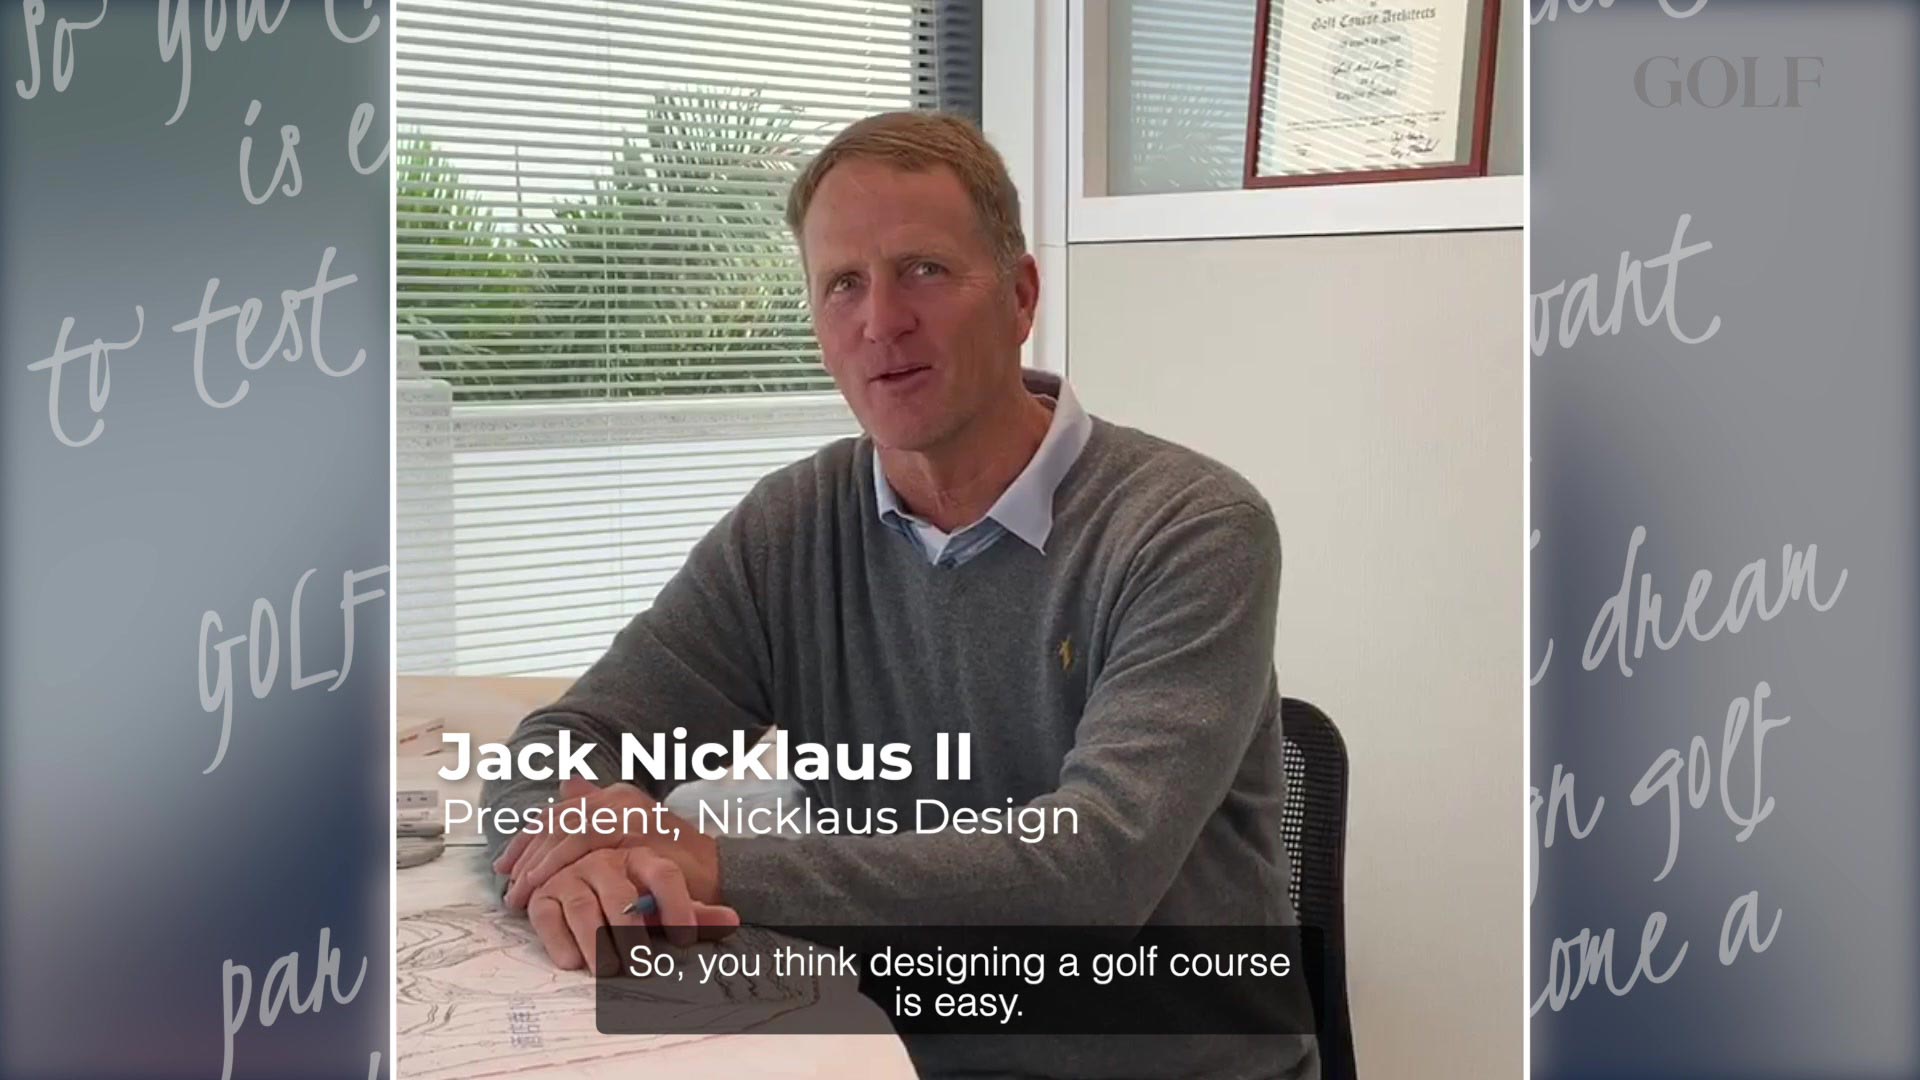 GOLF Magazine + Nicklaus Design Challenge now accepting submissions